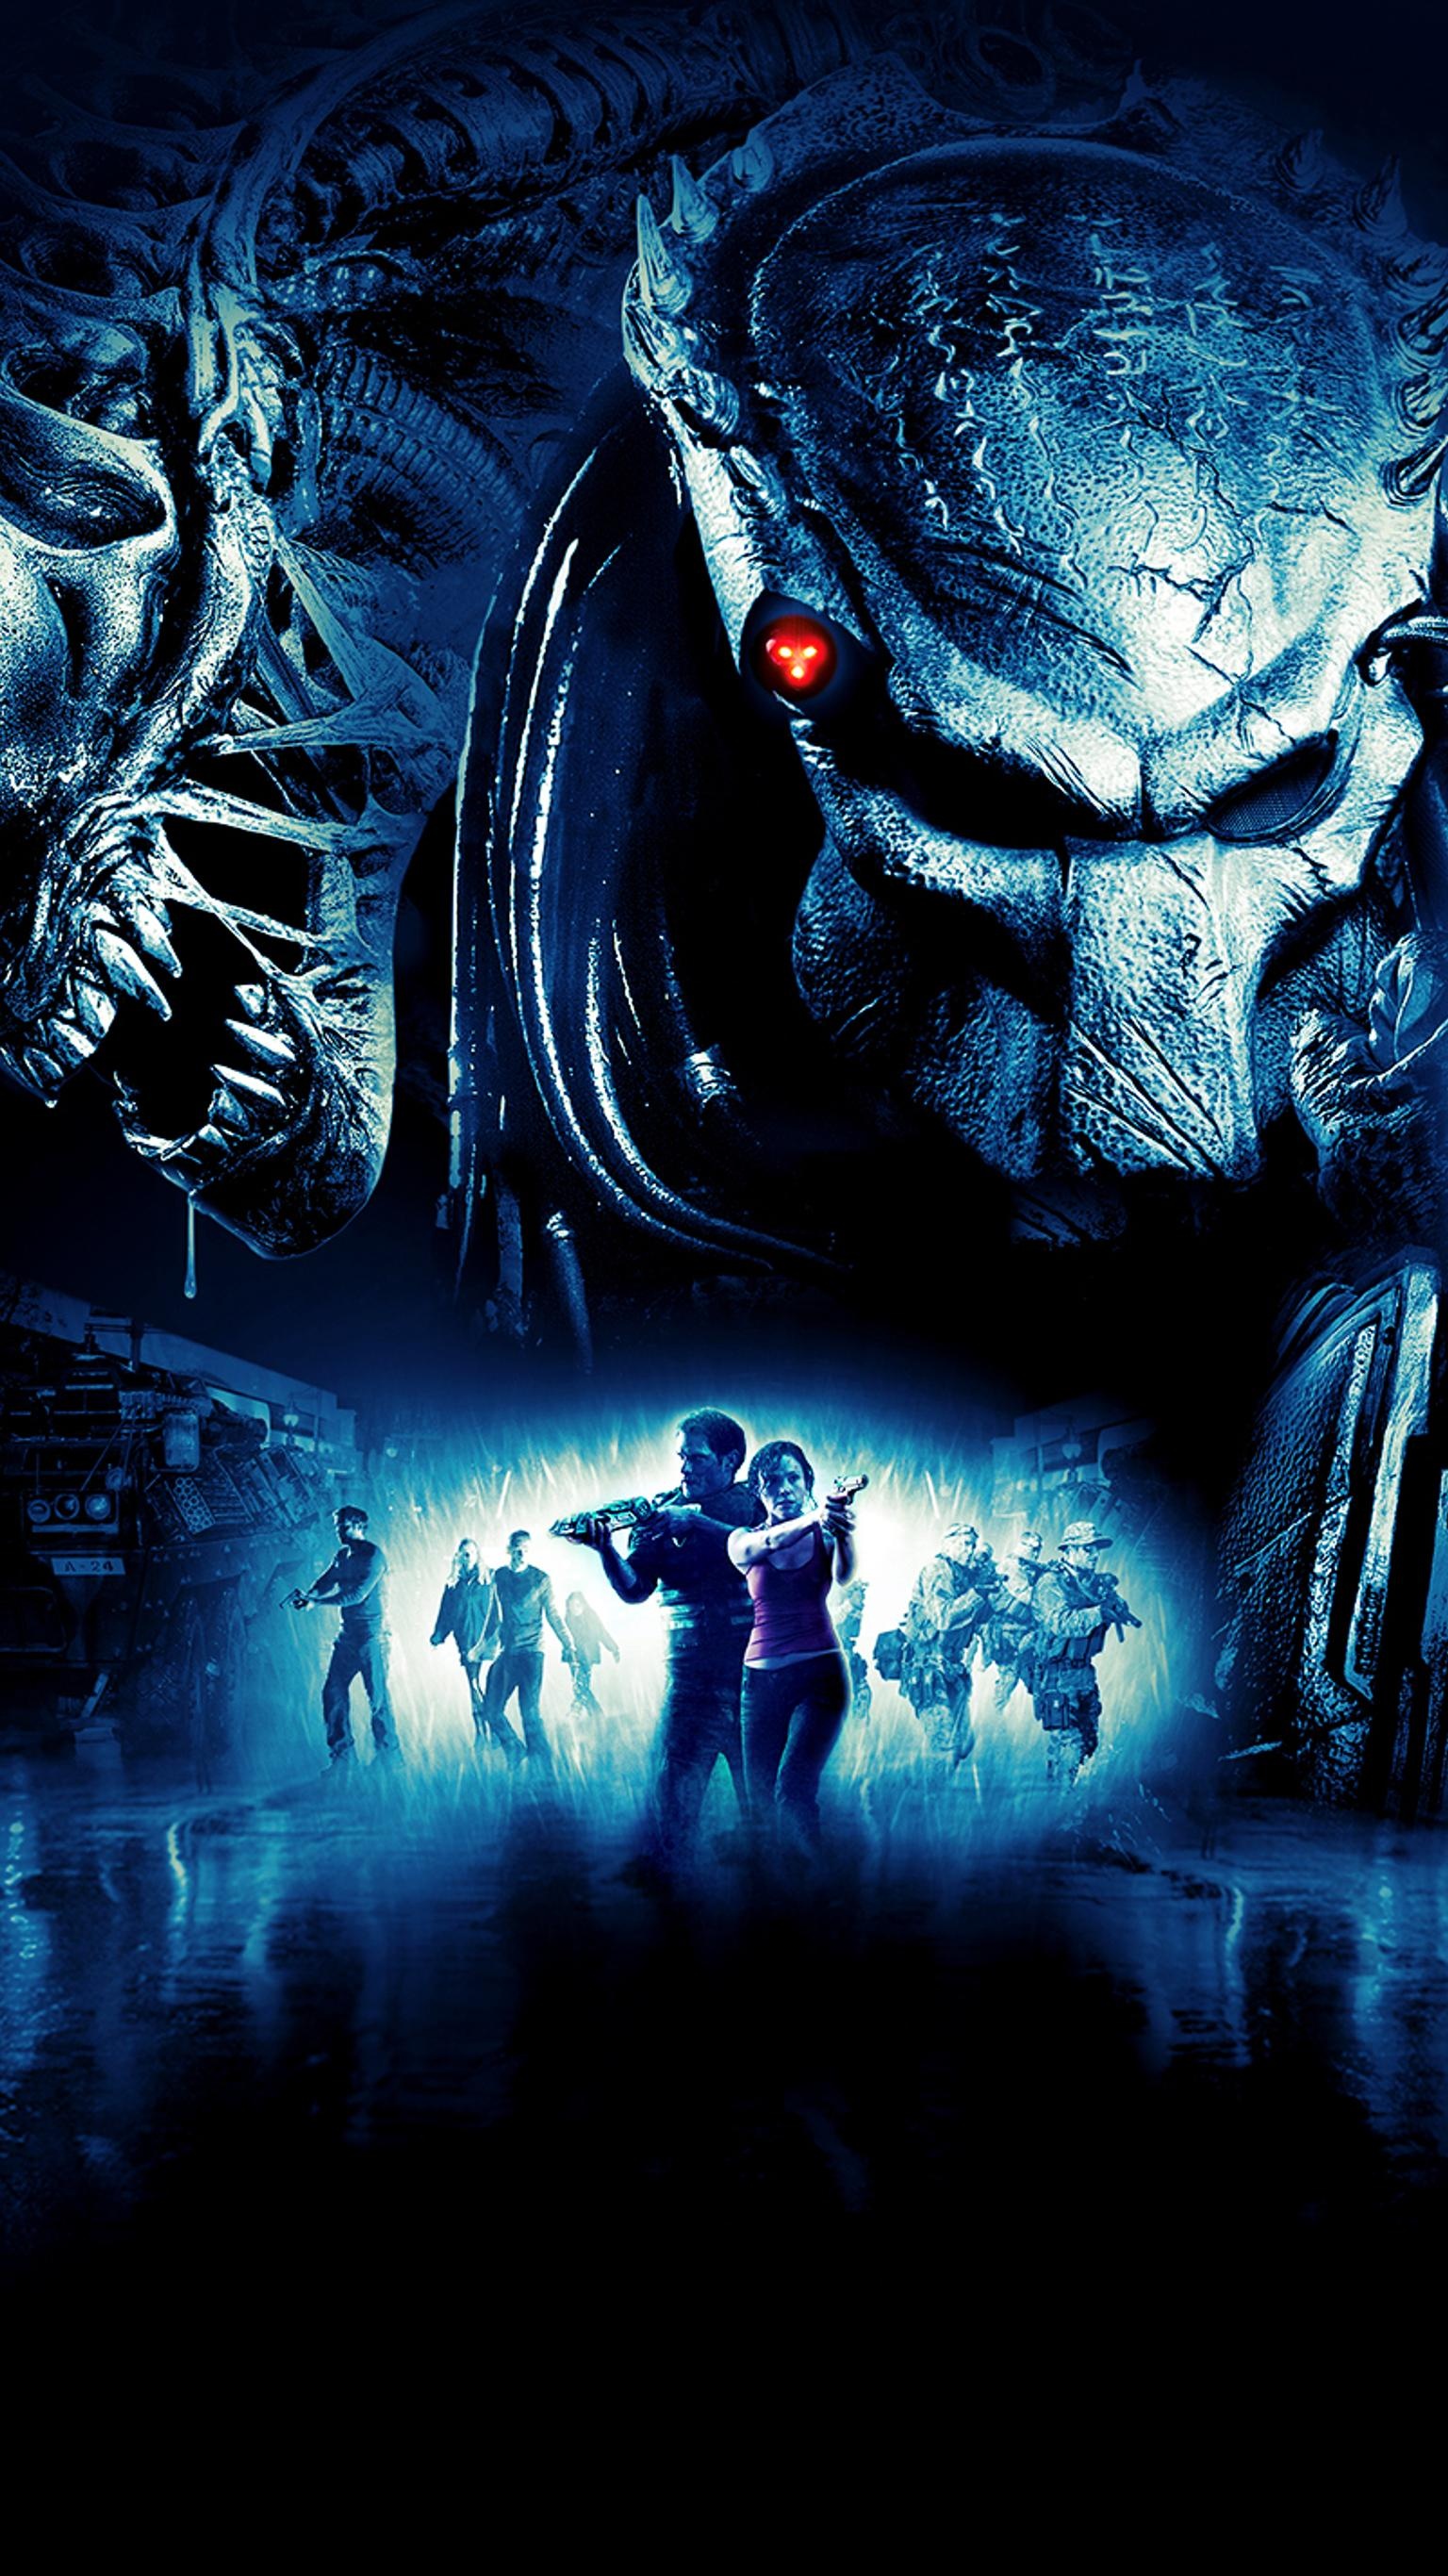 Predator: AVP, A 2004 science fiction action film written and directed by Paul W. S. Anderson. 1540x2740 HD Wallpaper.